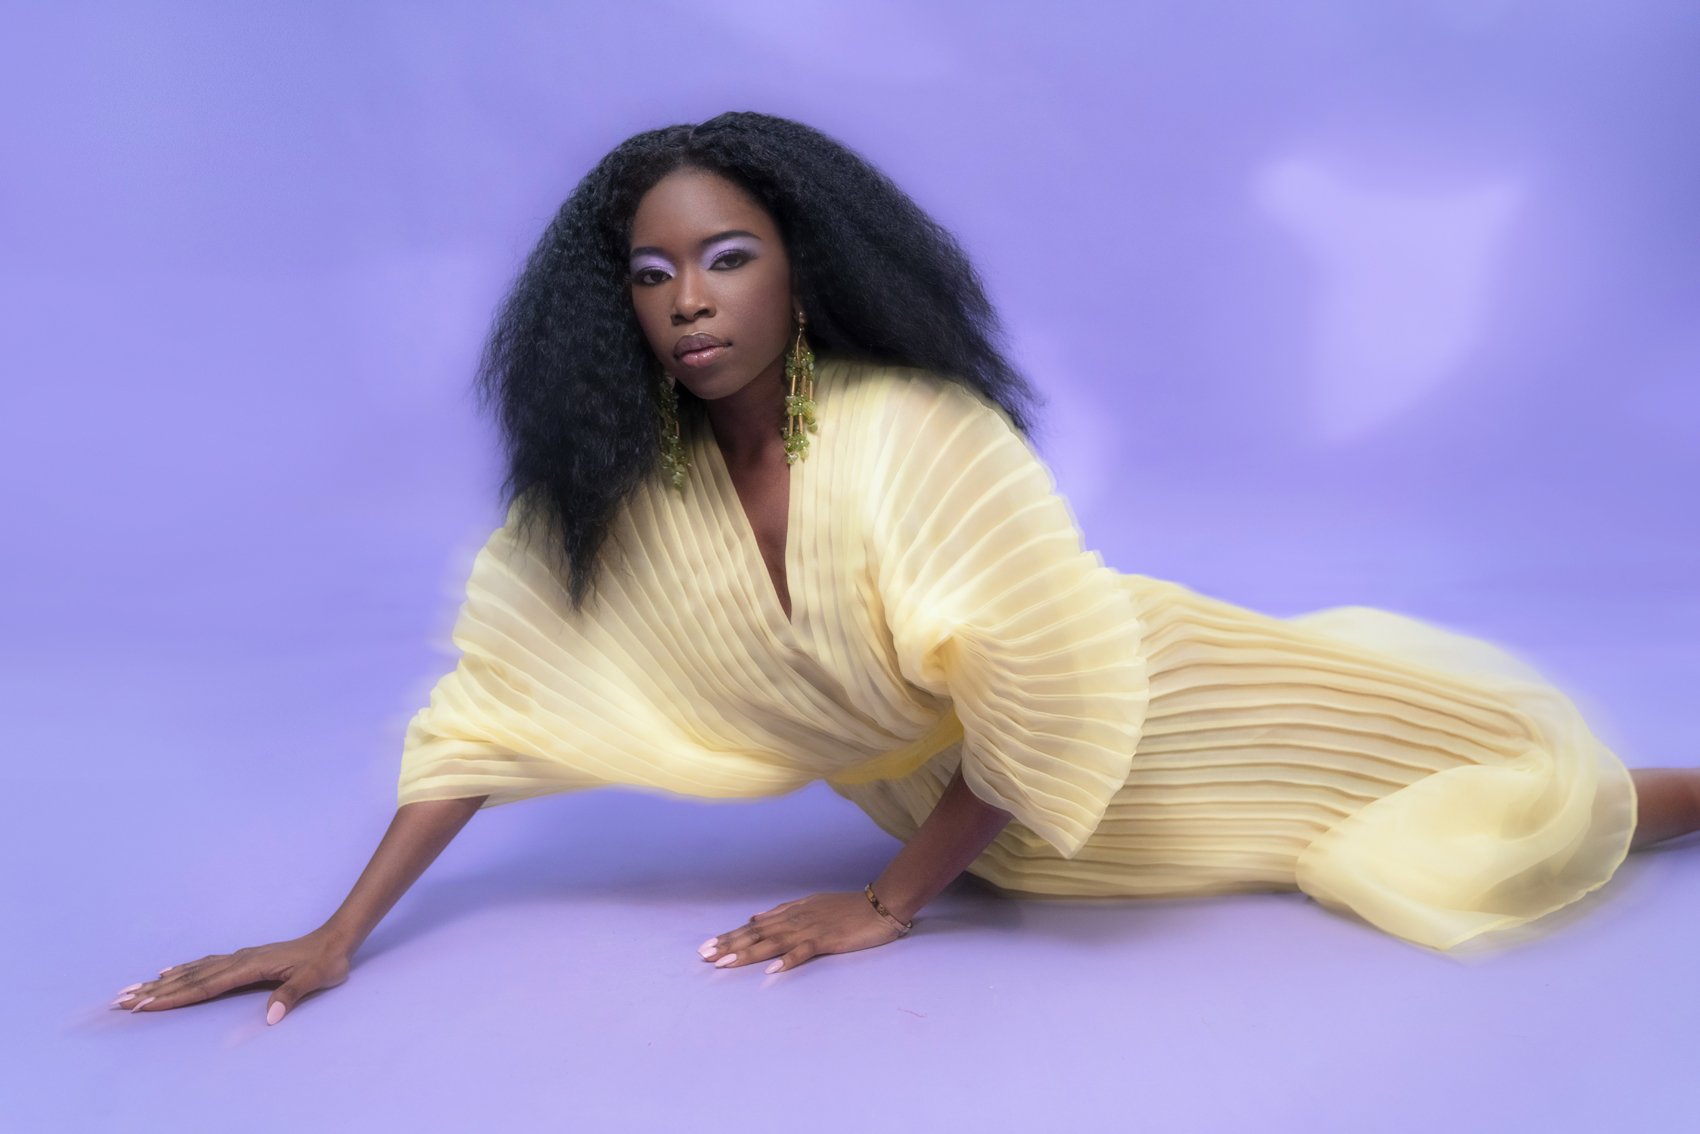 UNRULY AND PROUD, LATTE SAMUELS ON HER MUSIC DEBUT